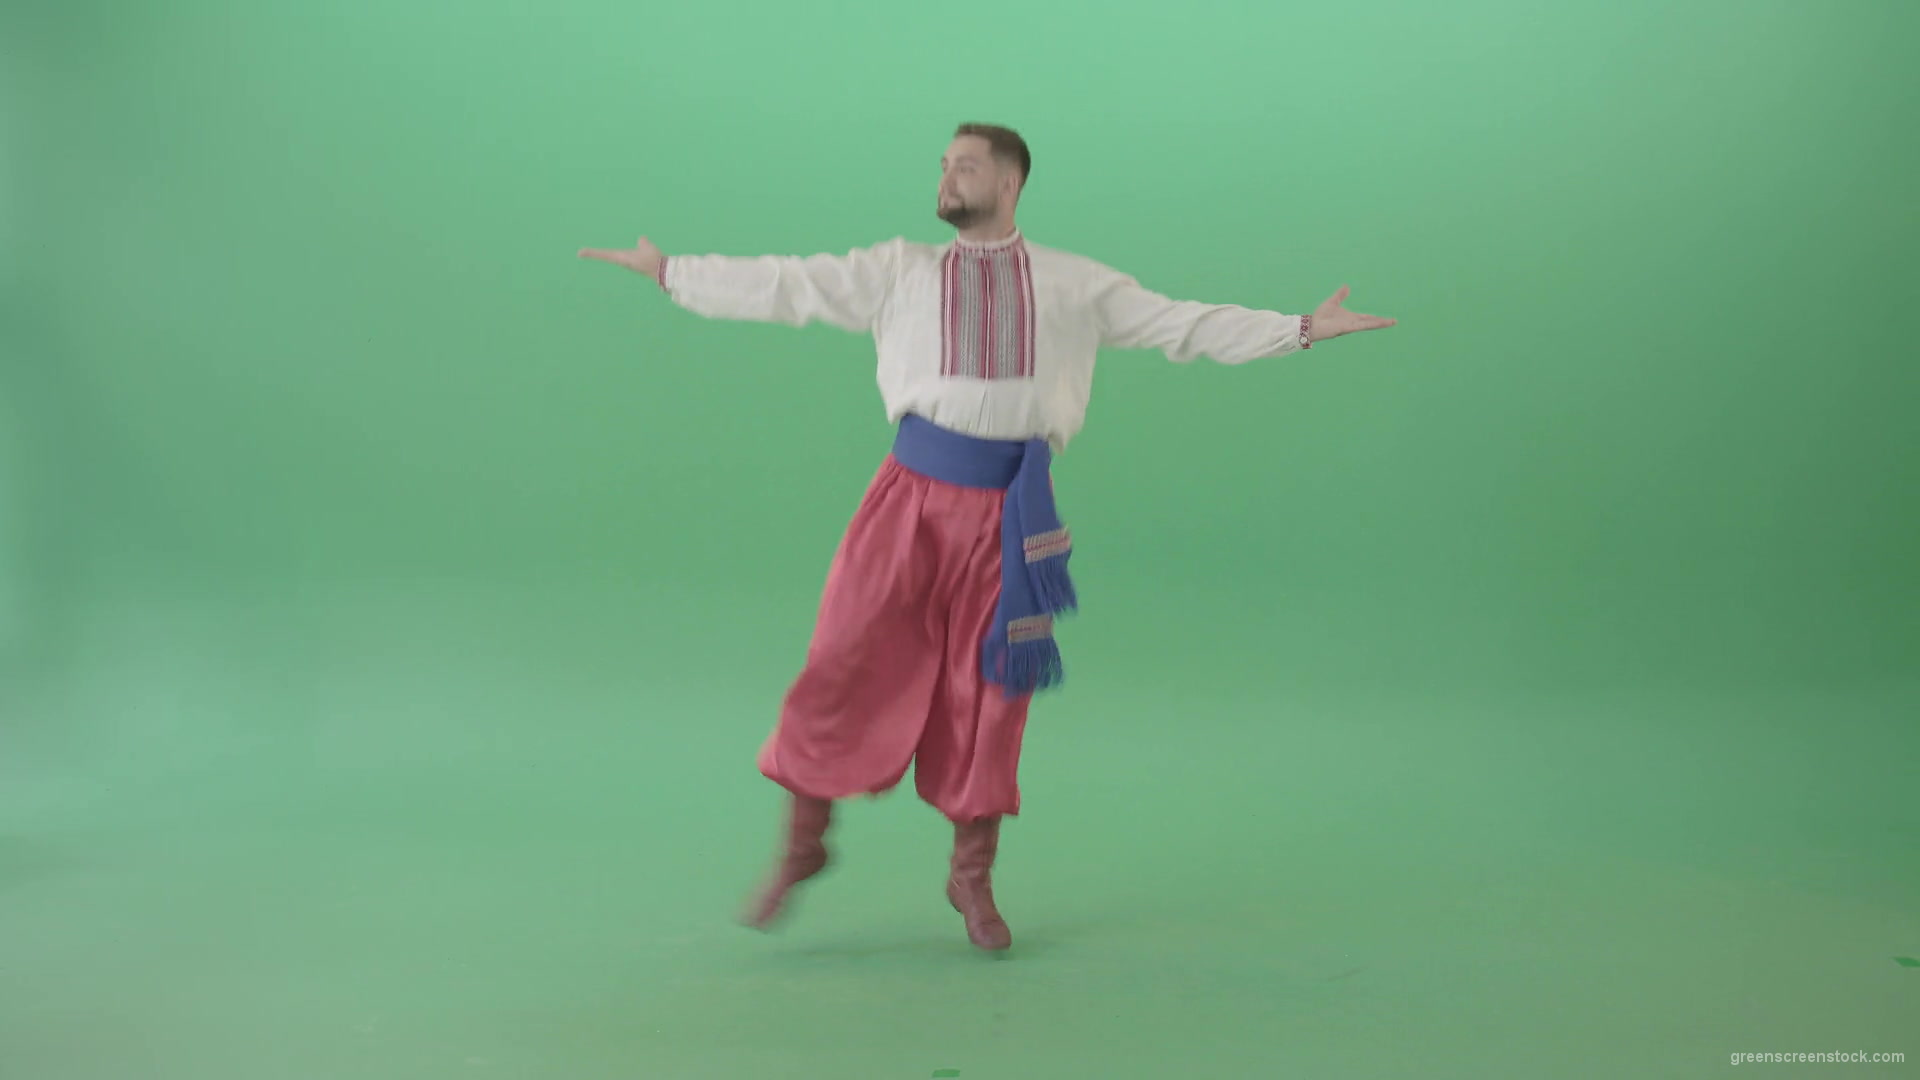 Slavic-Ukraine-folk-dance-by-UA-Cossack-man-jumping-isolated-on-Green-Background-4K-Video-Footage-1920_004 Green Screen Stock